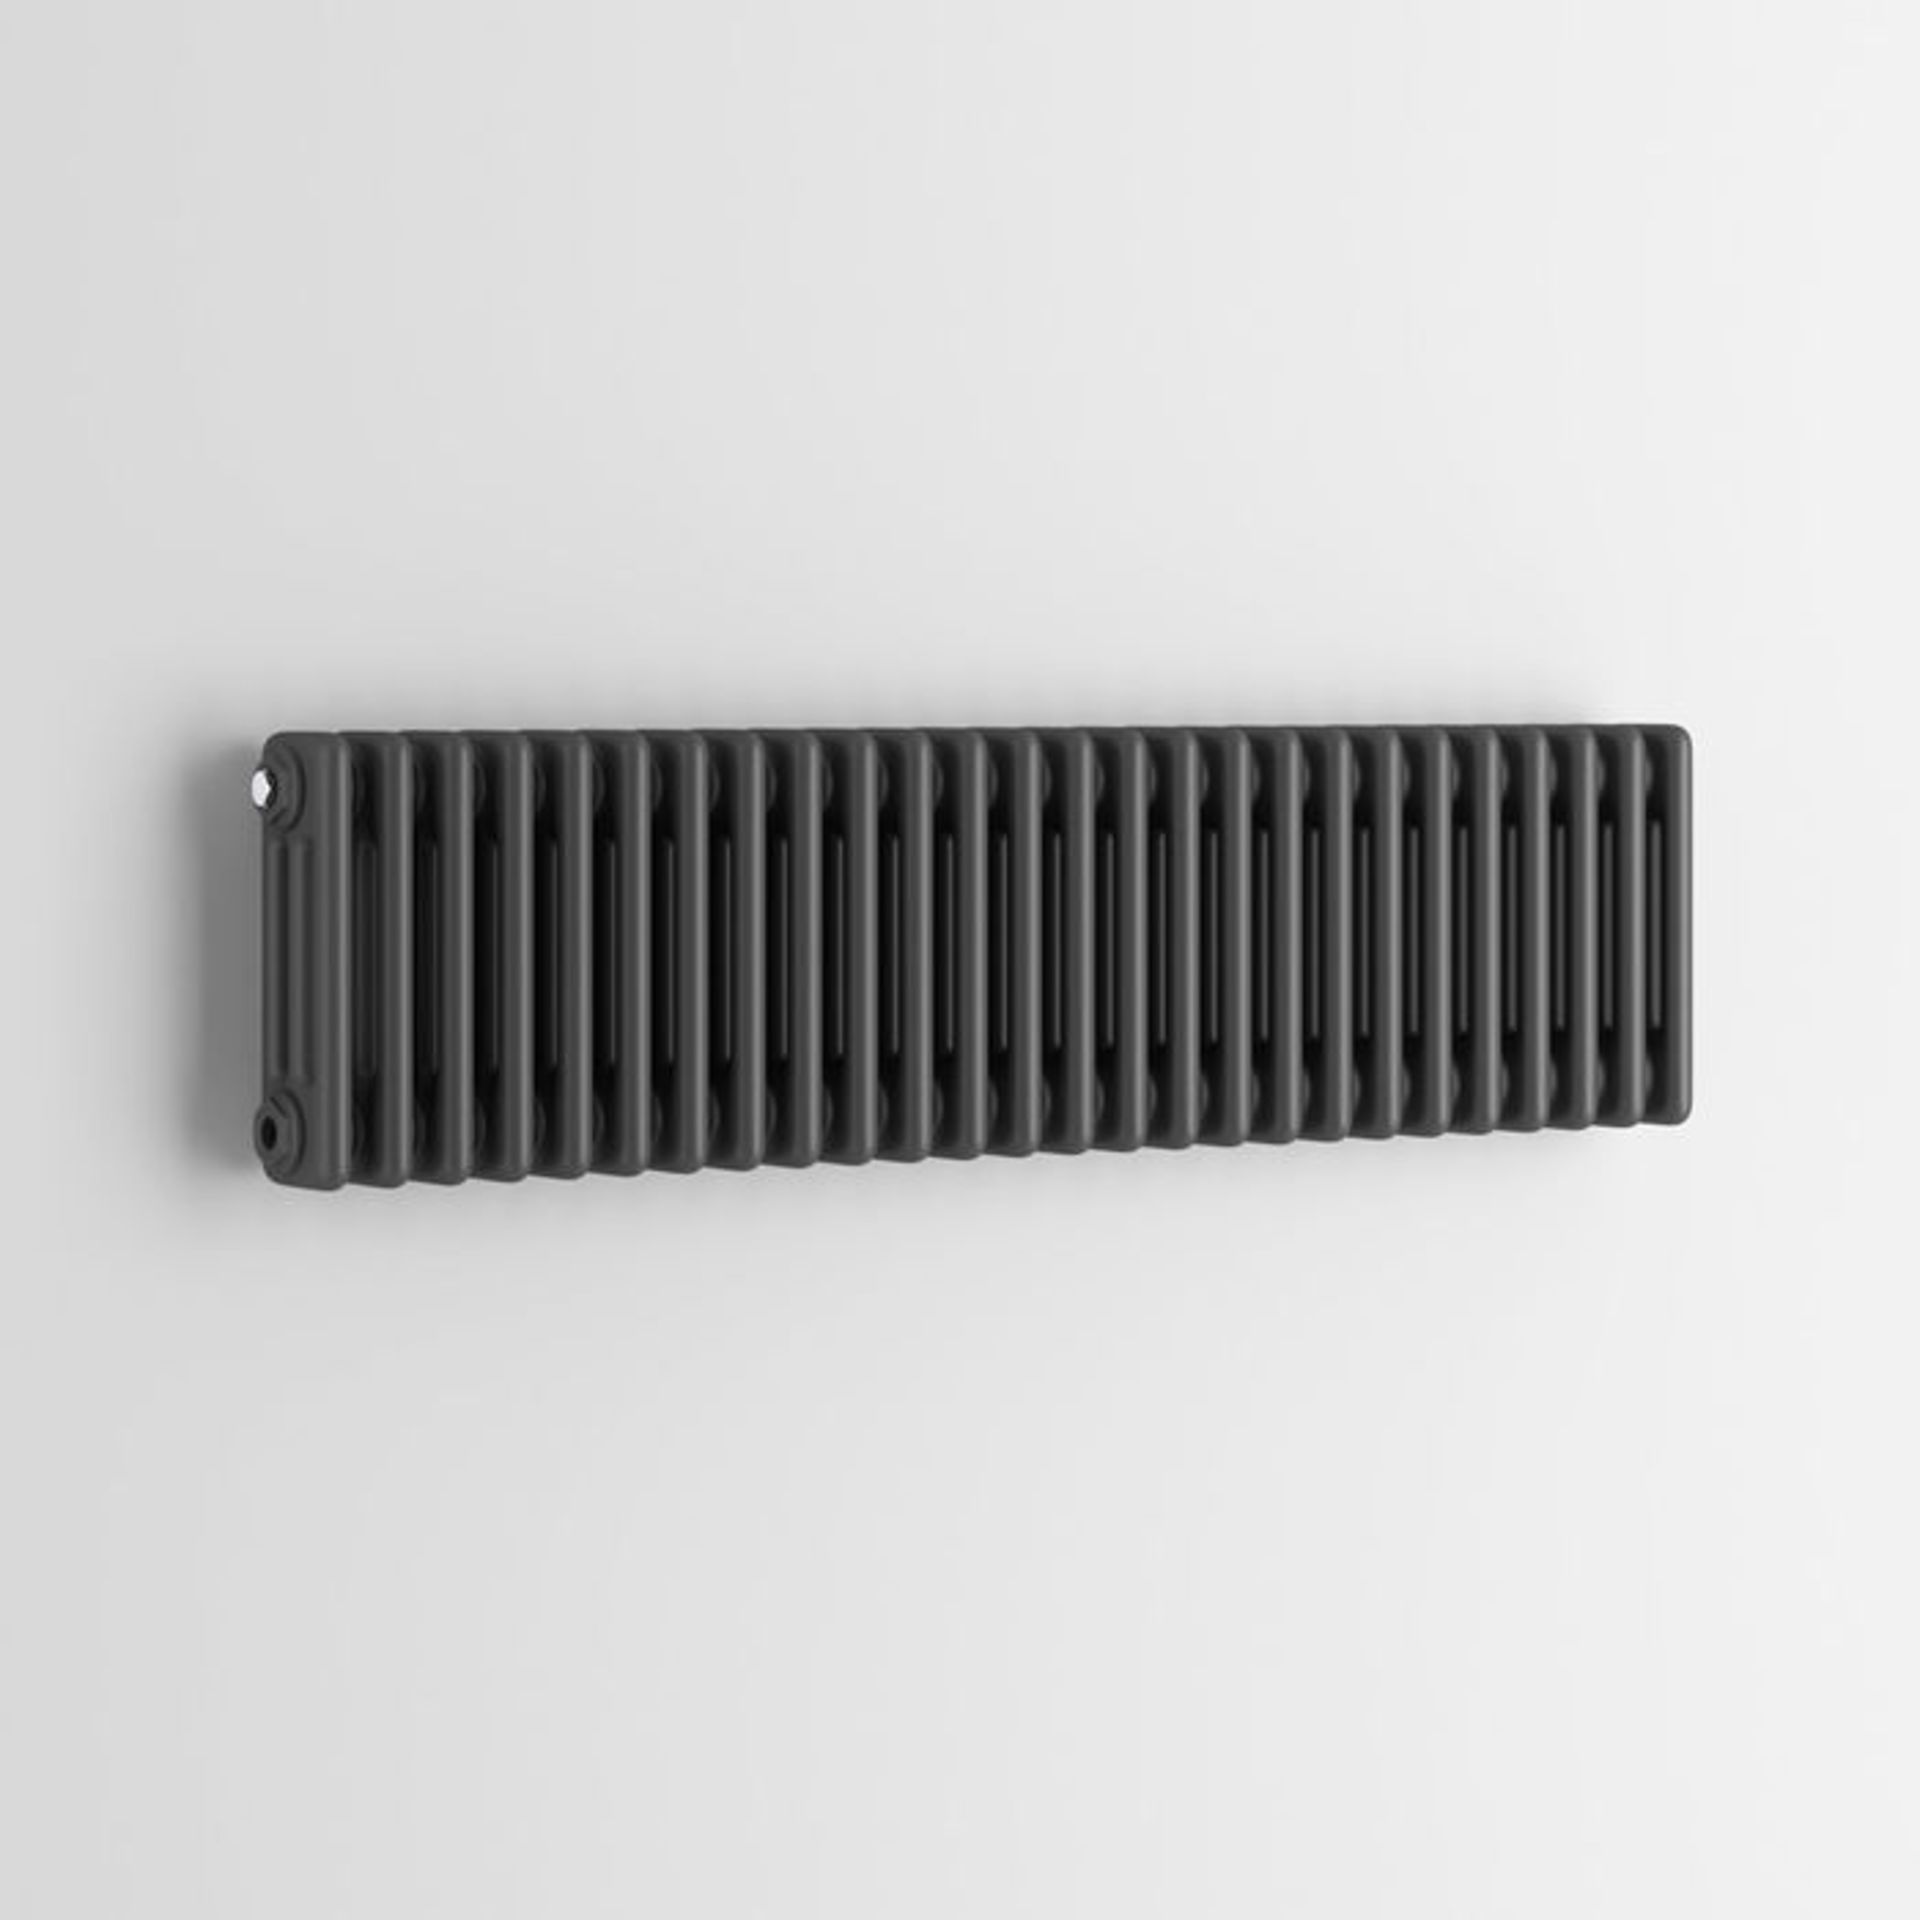 (DK29) 300x1188mm Anthracite Triple Panel Horizontal Colosseum Traditional Radiator. RRP £574.99. - Image 2 of 4